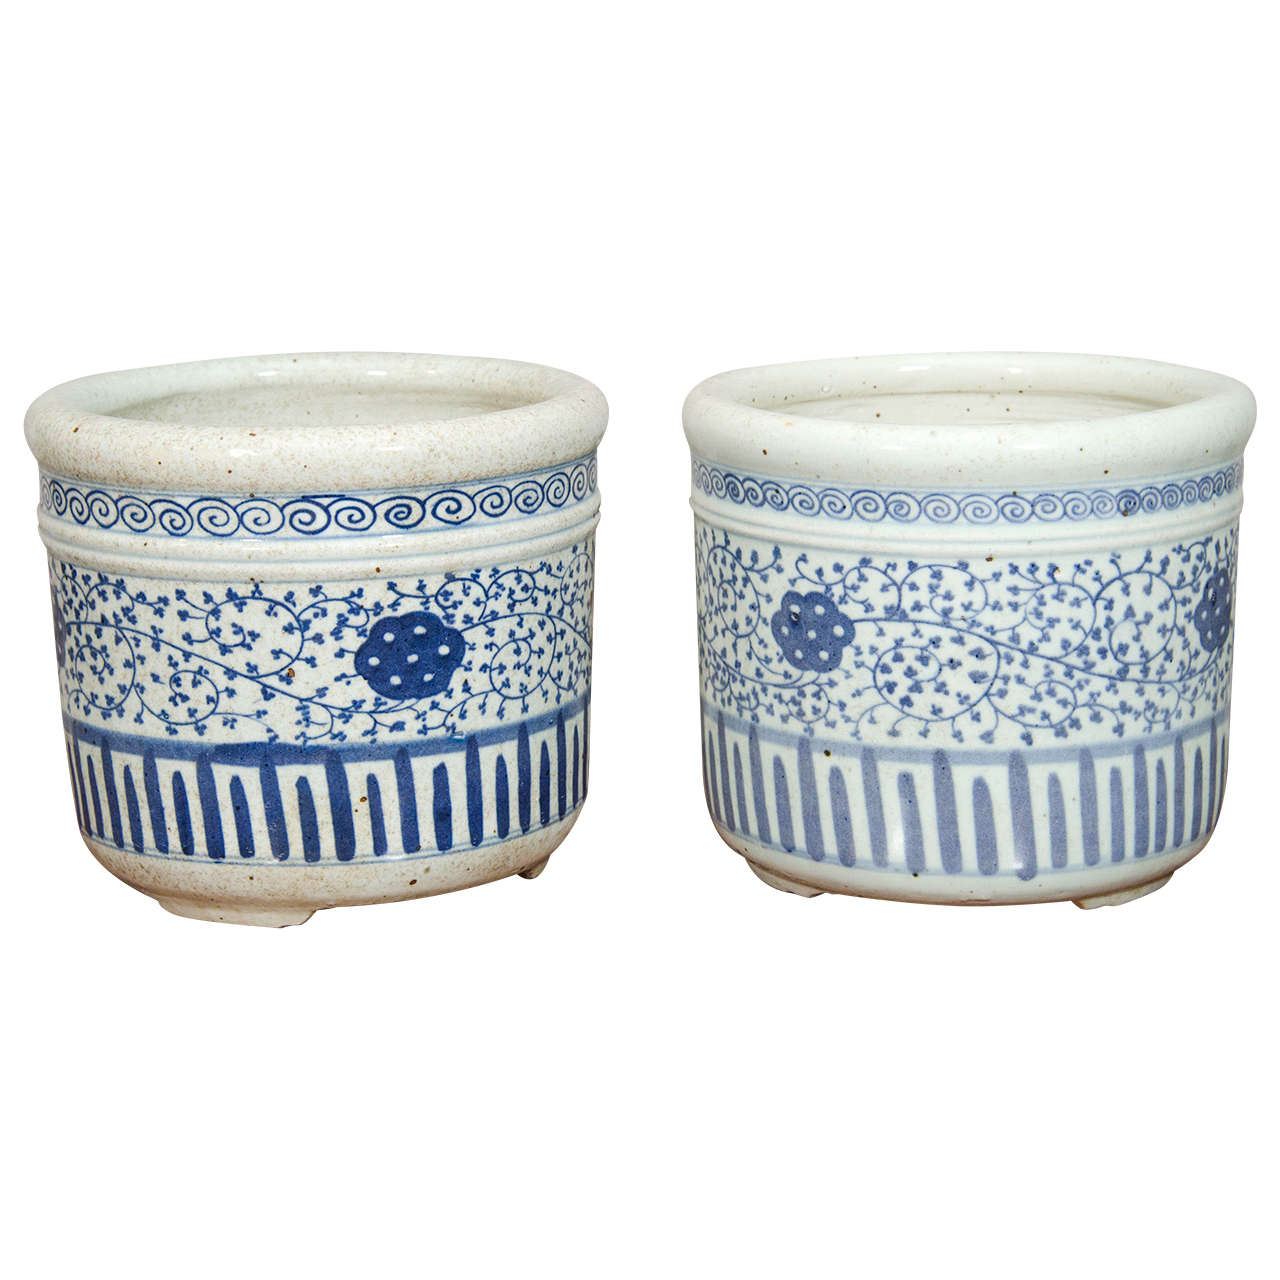 Pair of Chinese Blue and White Porcelain Planters